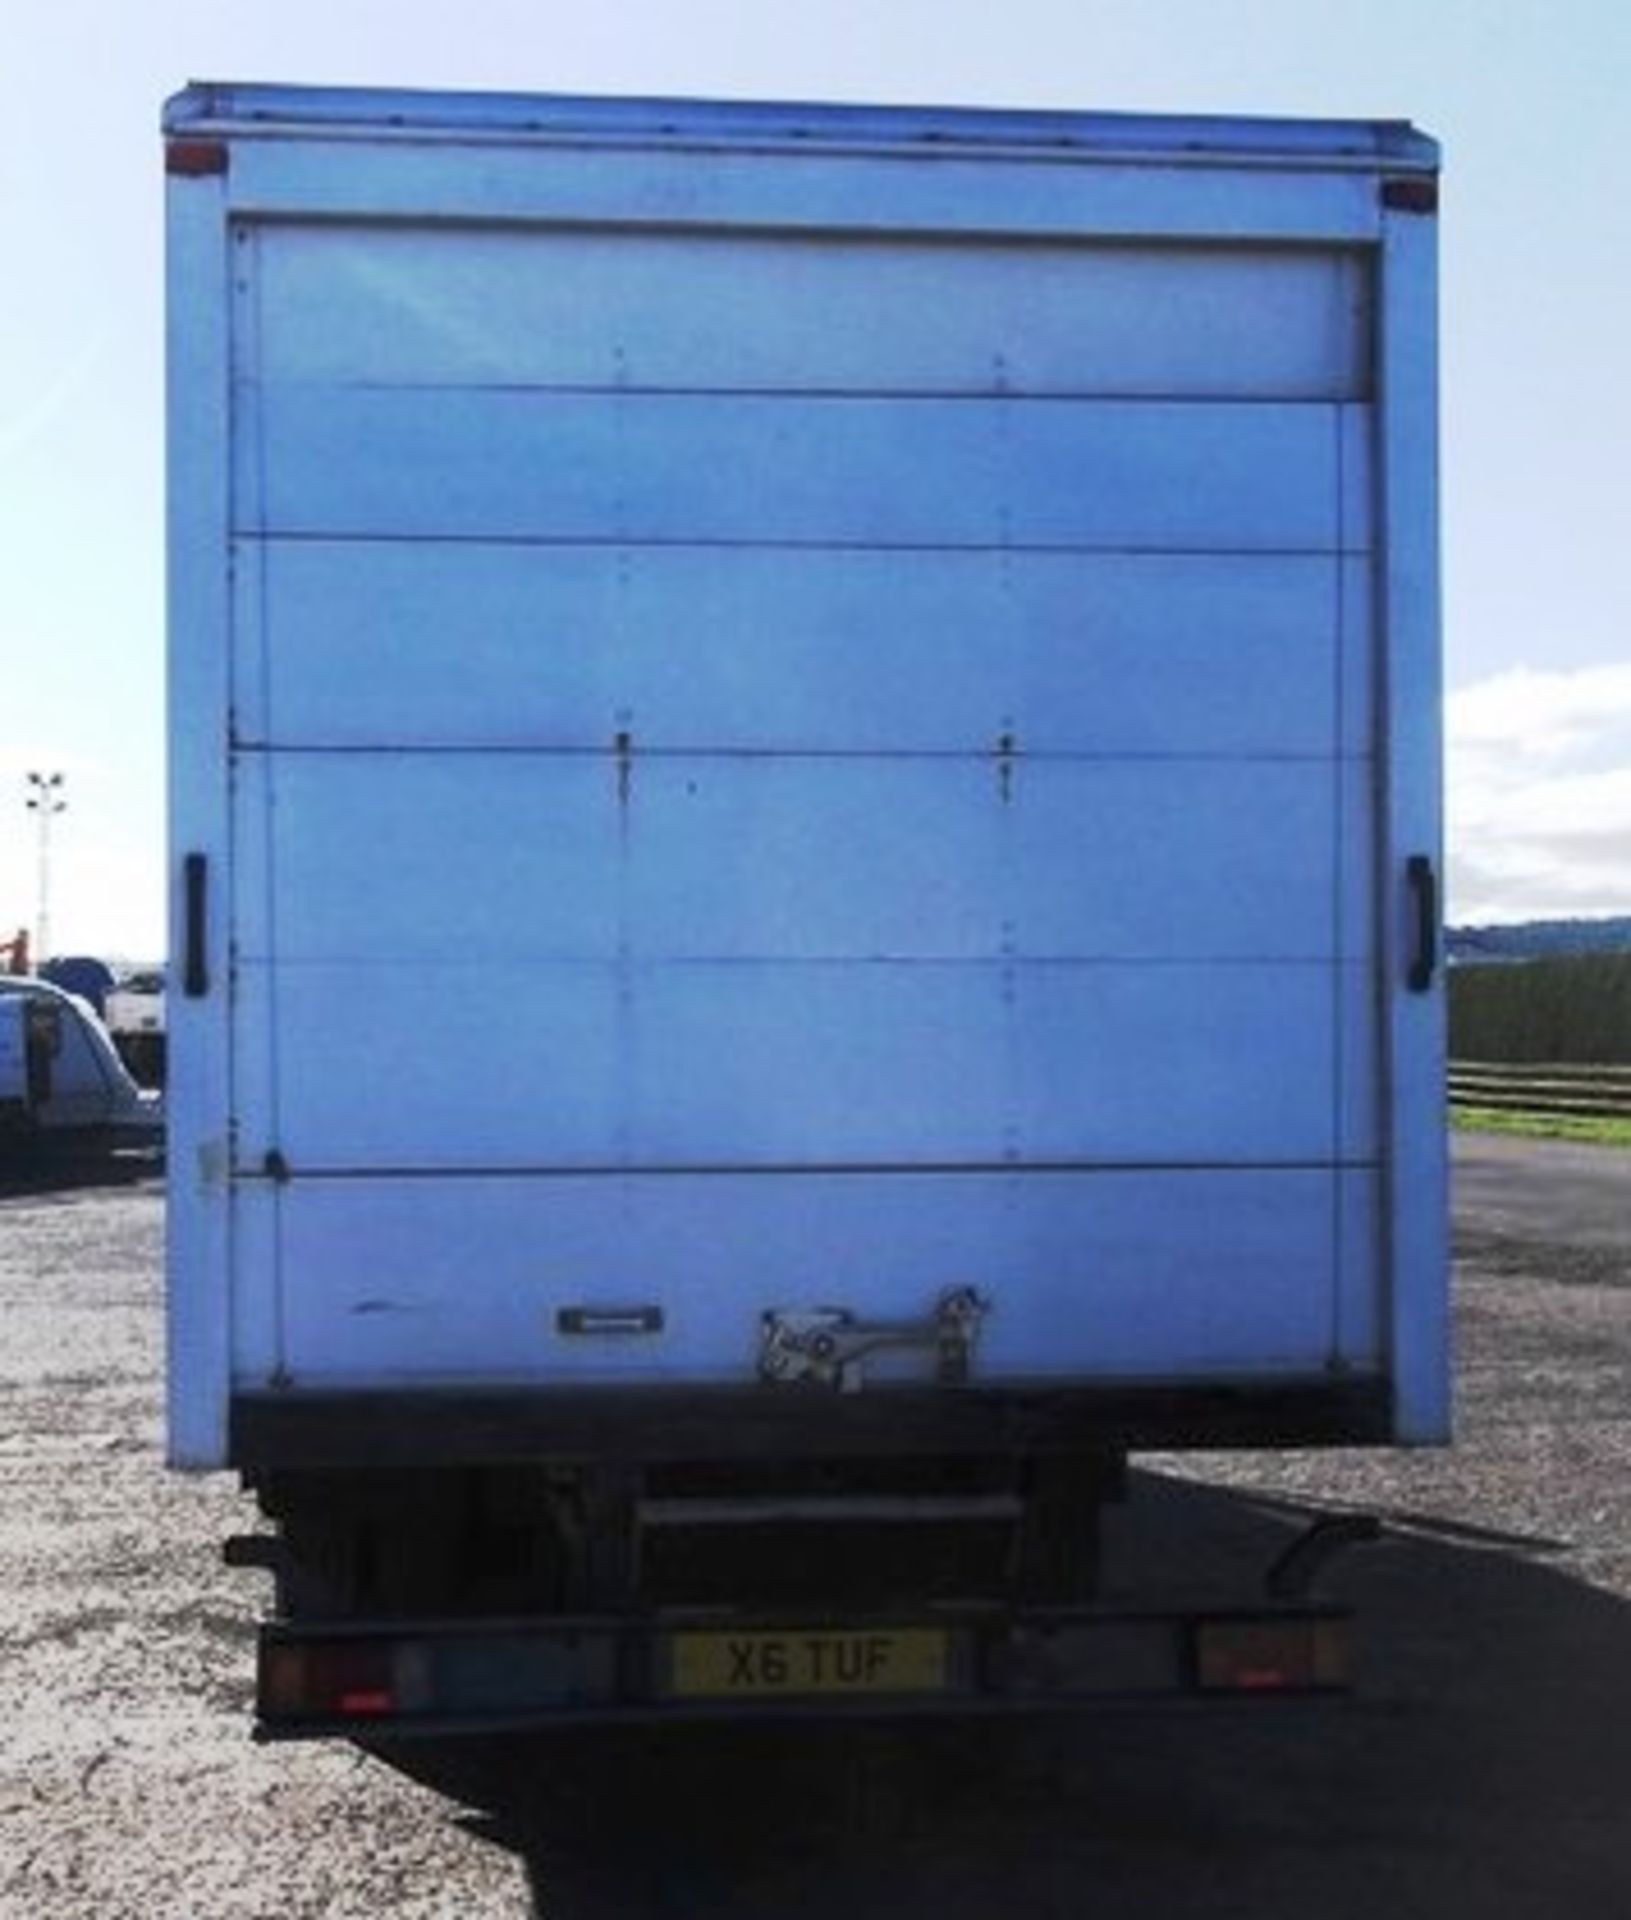 IVECO-FORD CARGO TECTOR - 3920cc
Body: 2 Dr Van
Color: White
First Reg: 05/03/2004
Doors: 2
MOT: - Image 7 of 10